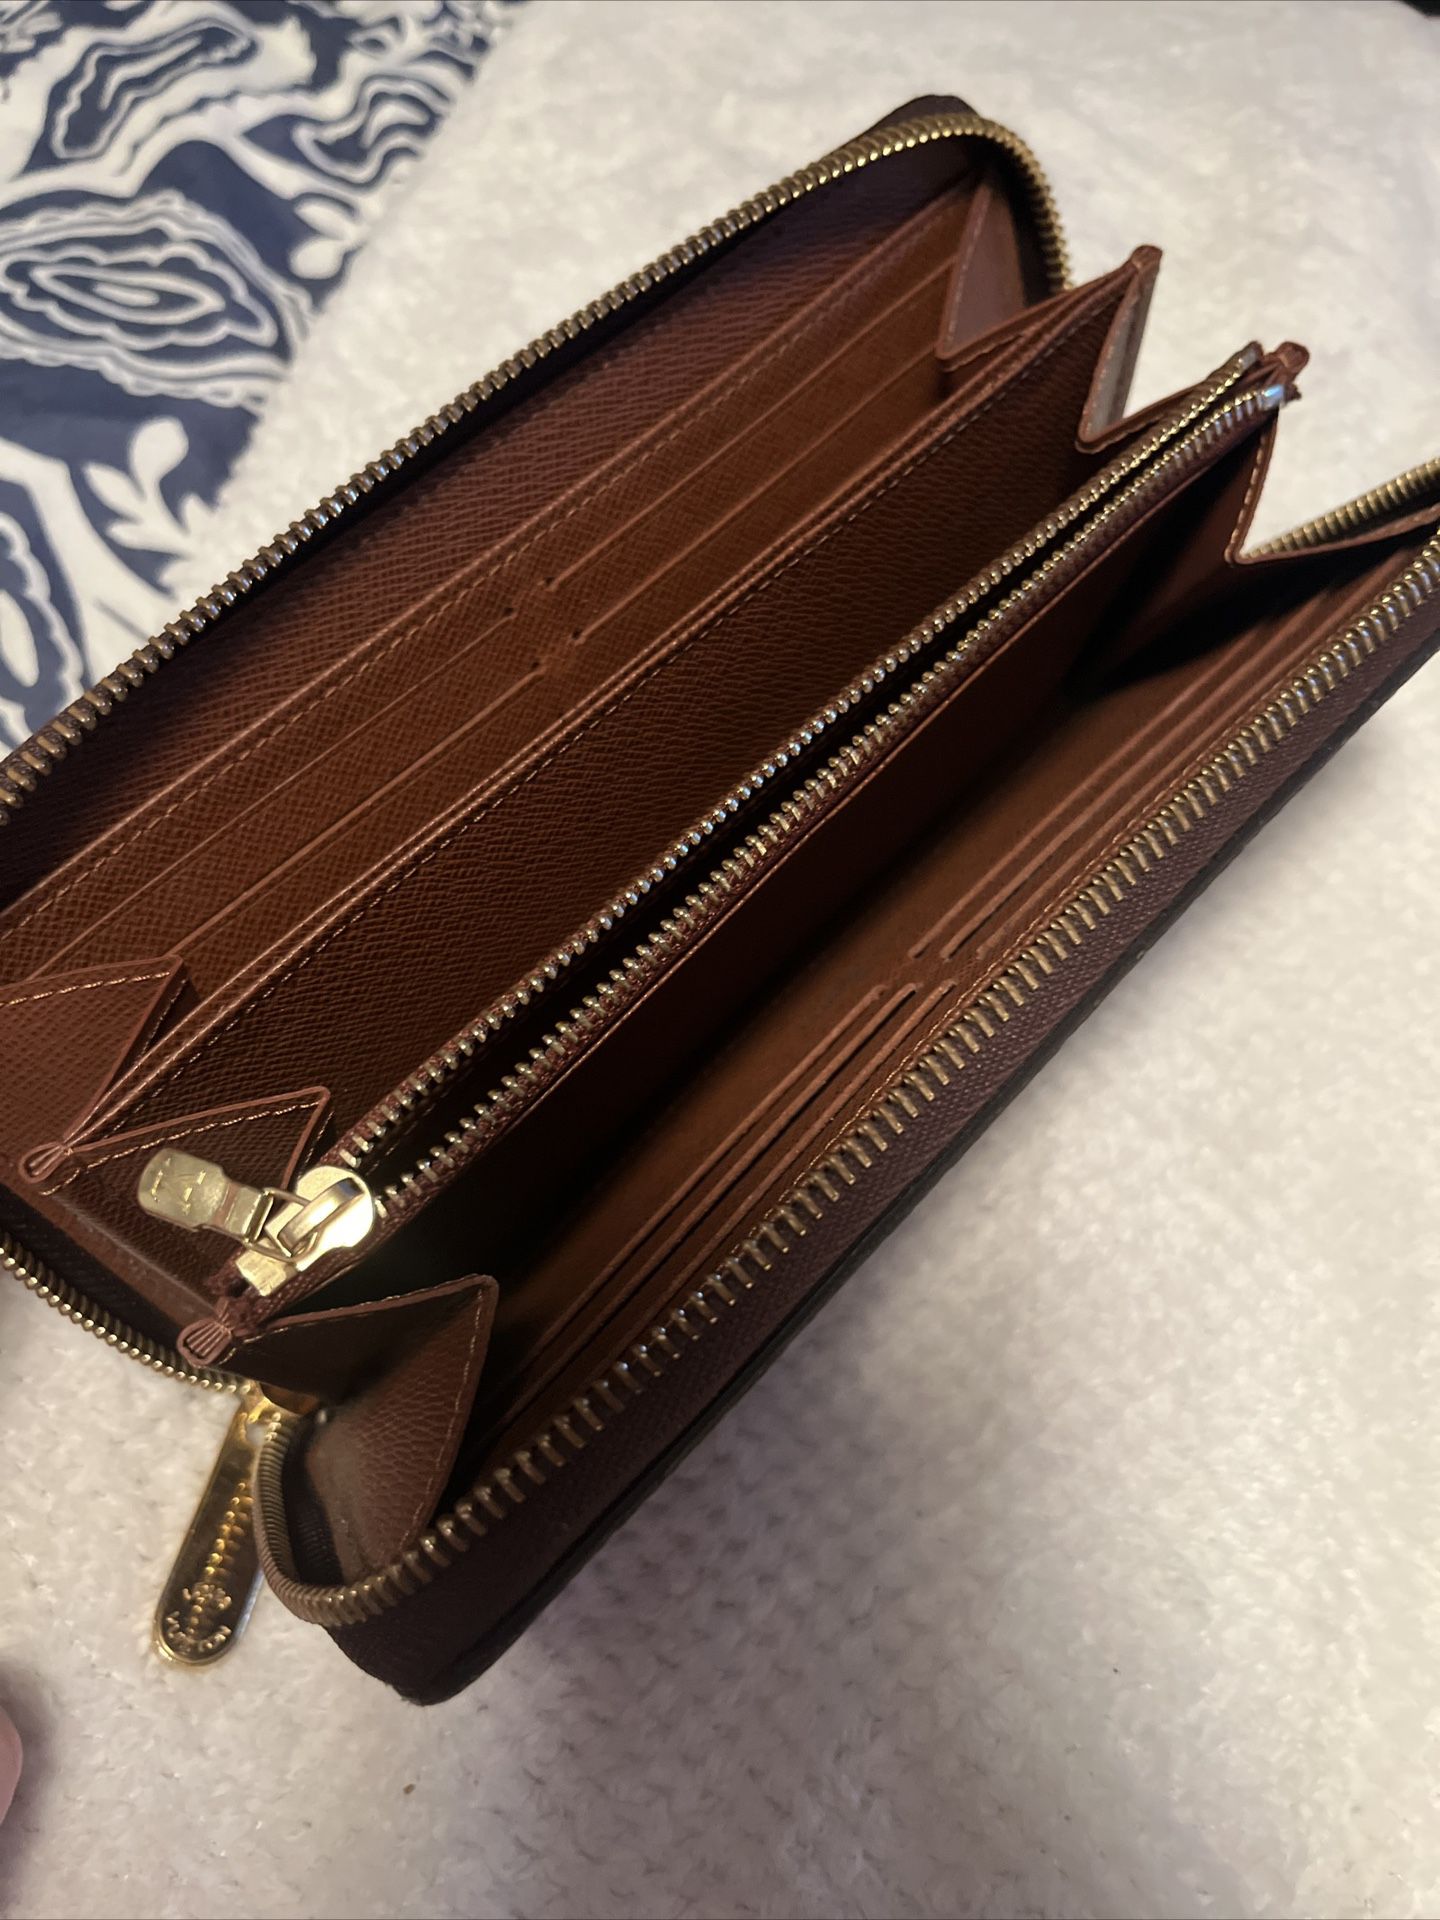 Brown Louis Vuitton Zippy WALLET for Sale in Brooklyn, NY - OfferUp